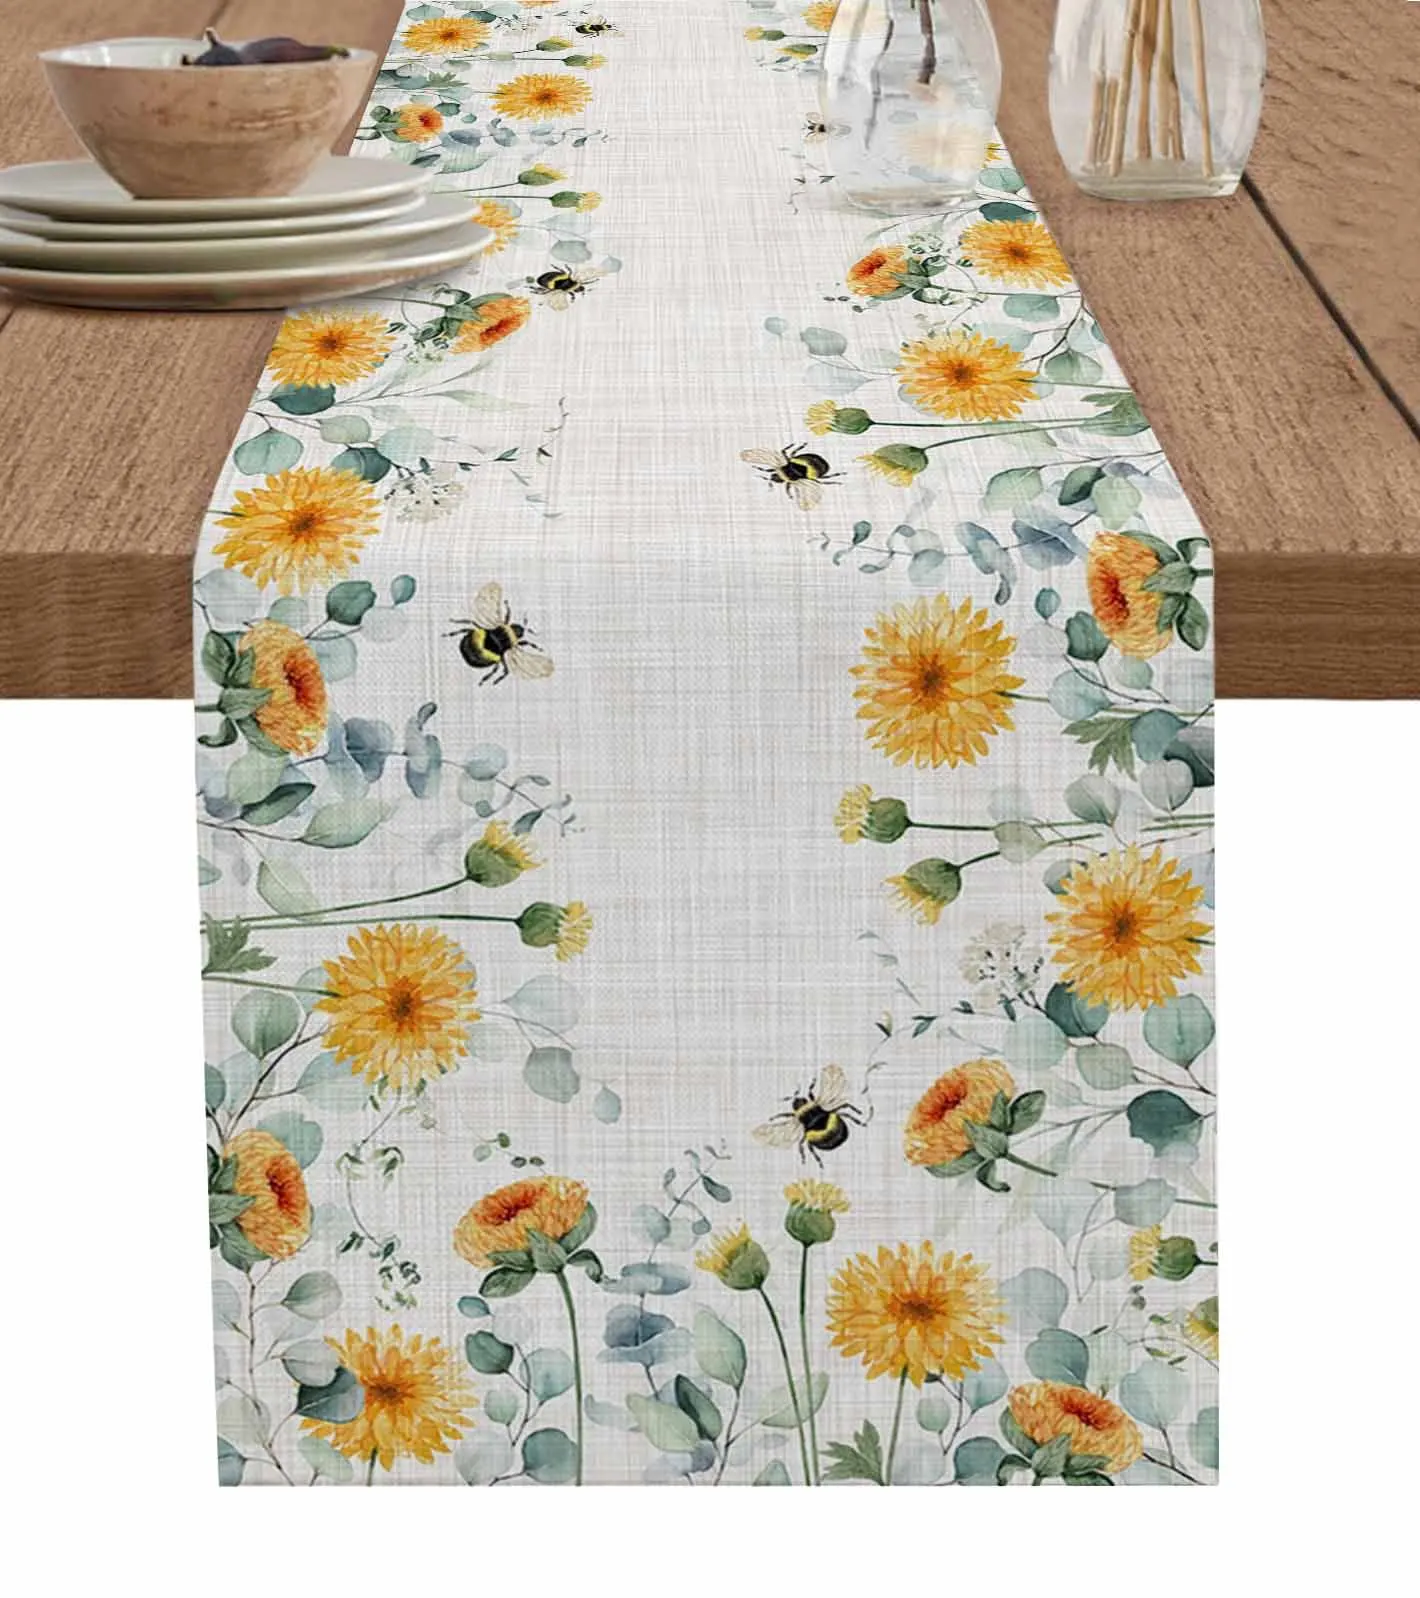 

Pastoral Eucalyptus Taraxacum Leaves Spring Table Runner for Dining Table Wedding Decor Tablecloth Home Party Decor Table Mats